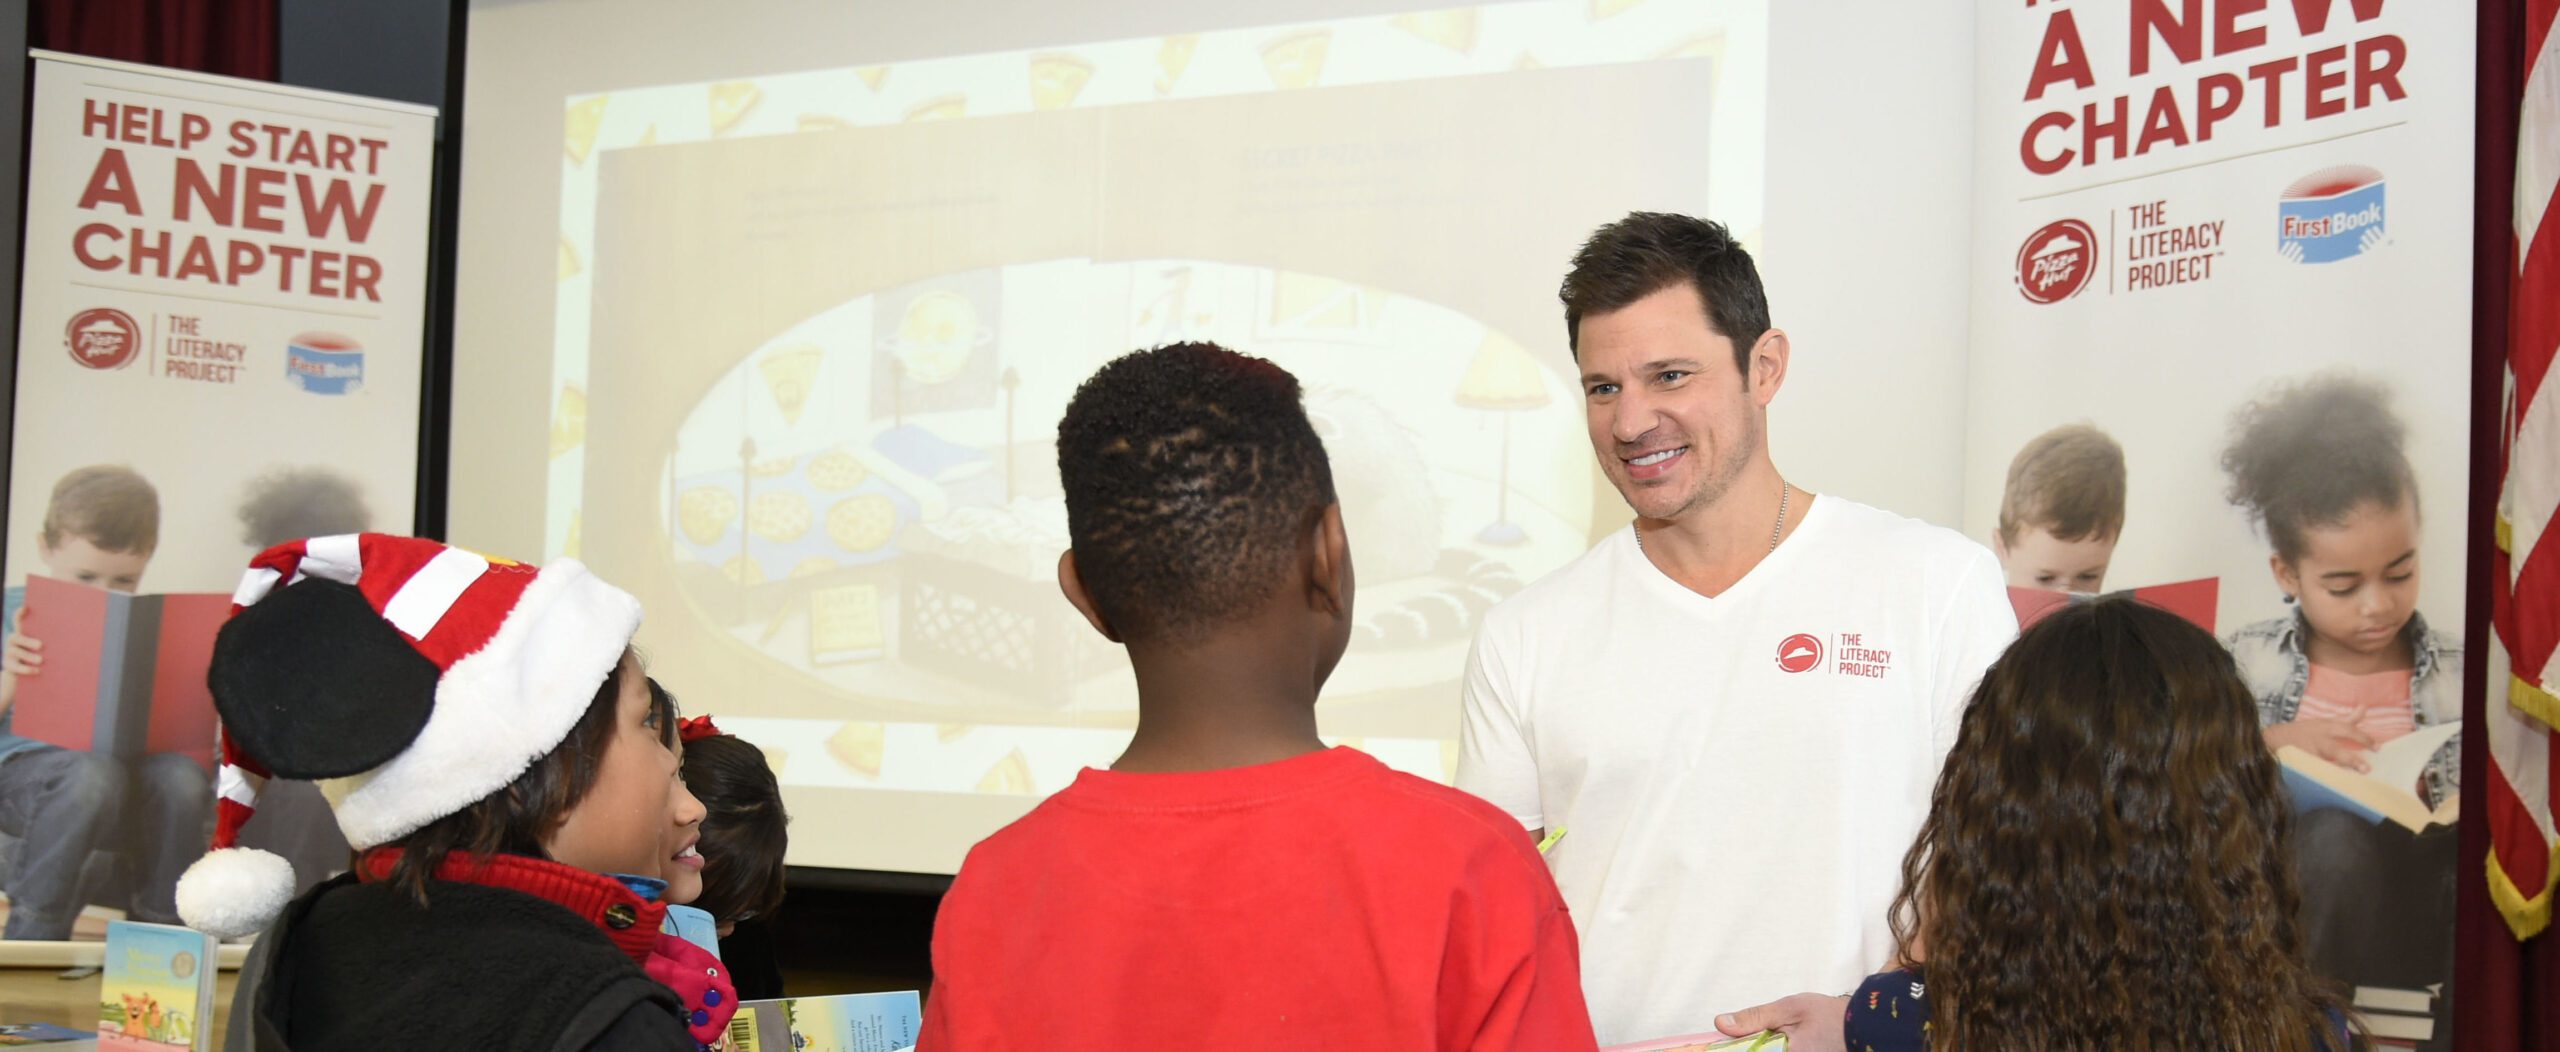 Nick Lachey, First Book, and Pizza Hut surprise elementary students with a pizza party.